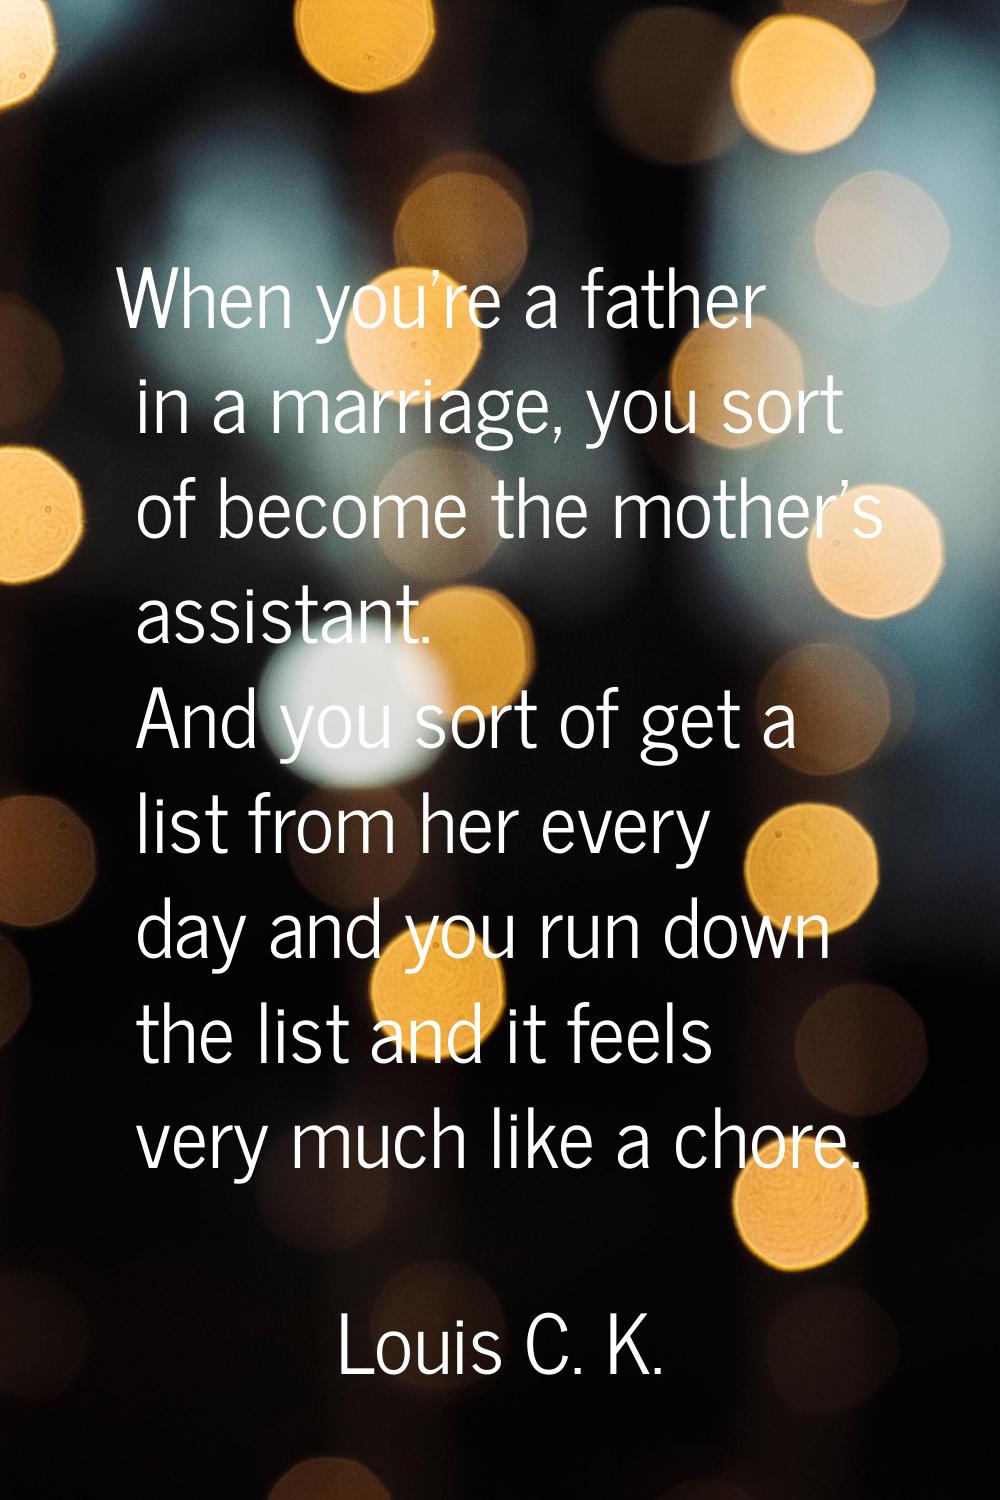 When you're a father in a marriage, you sort of become the mother's assistant. And you sort of get 